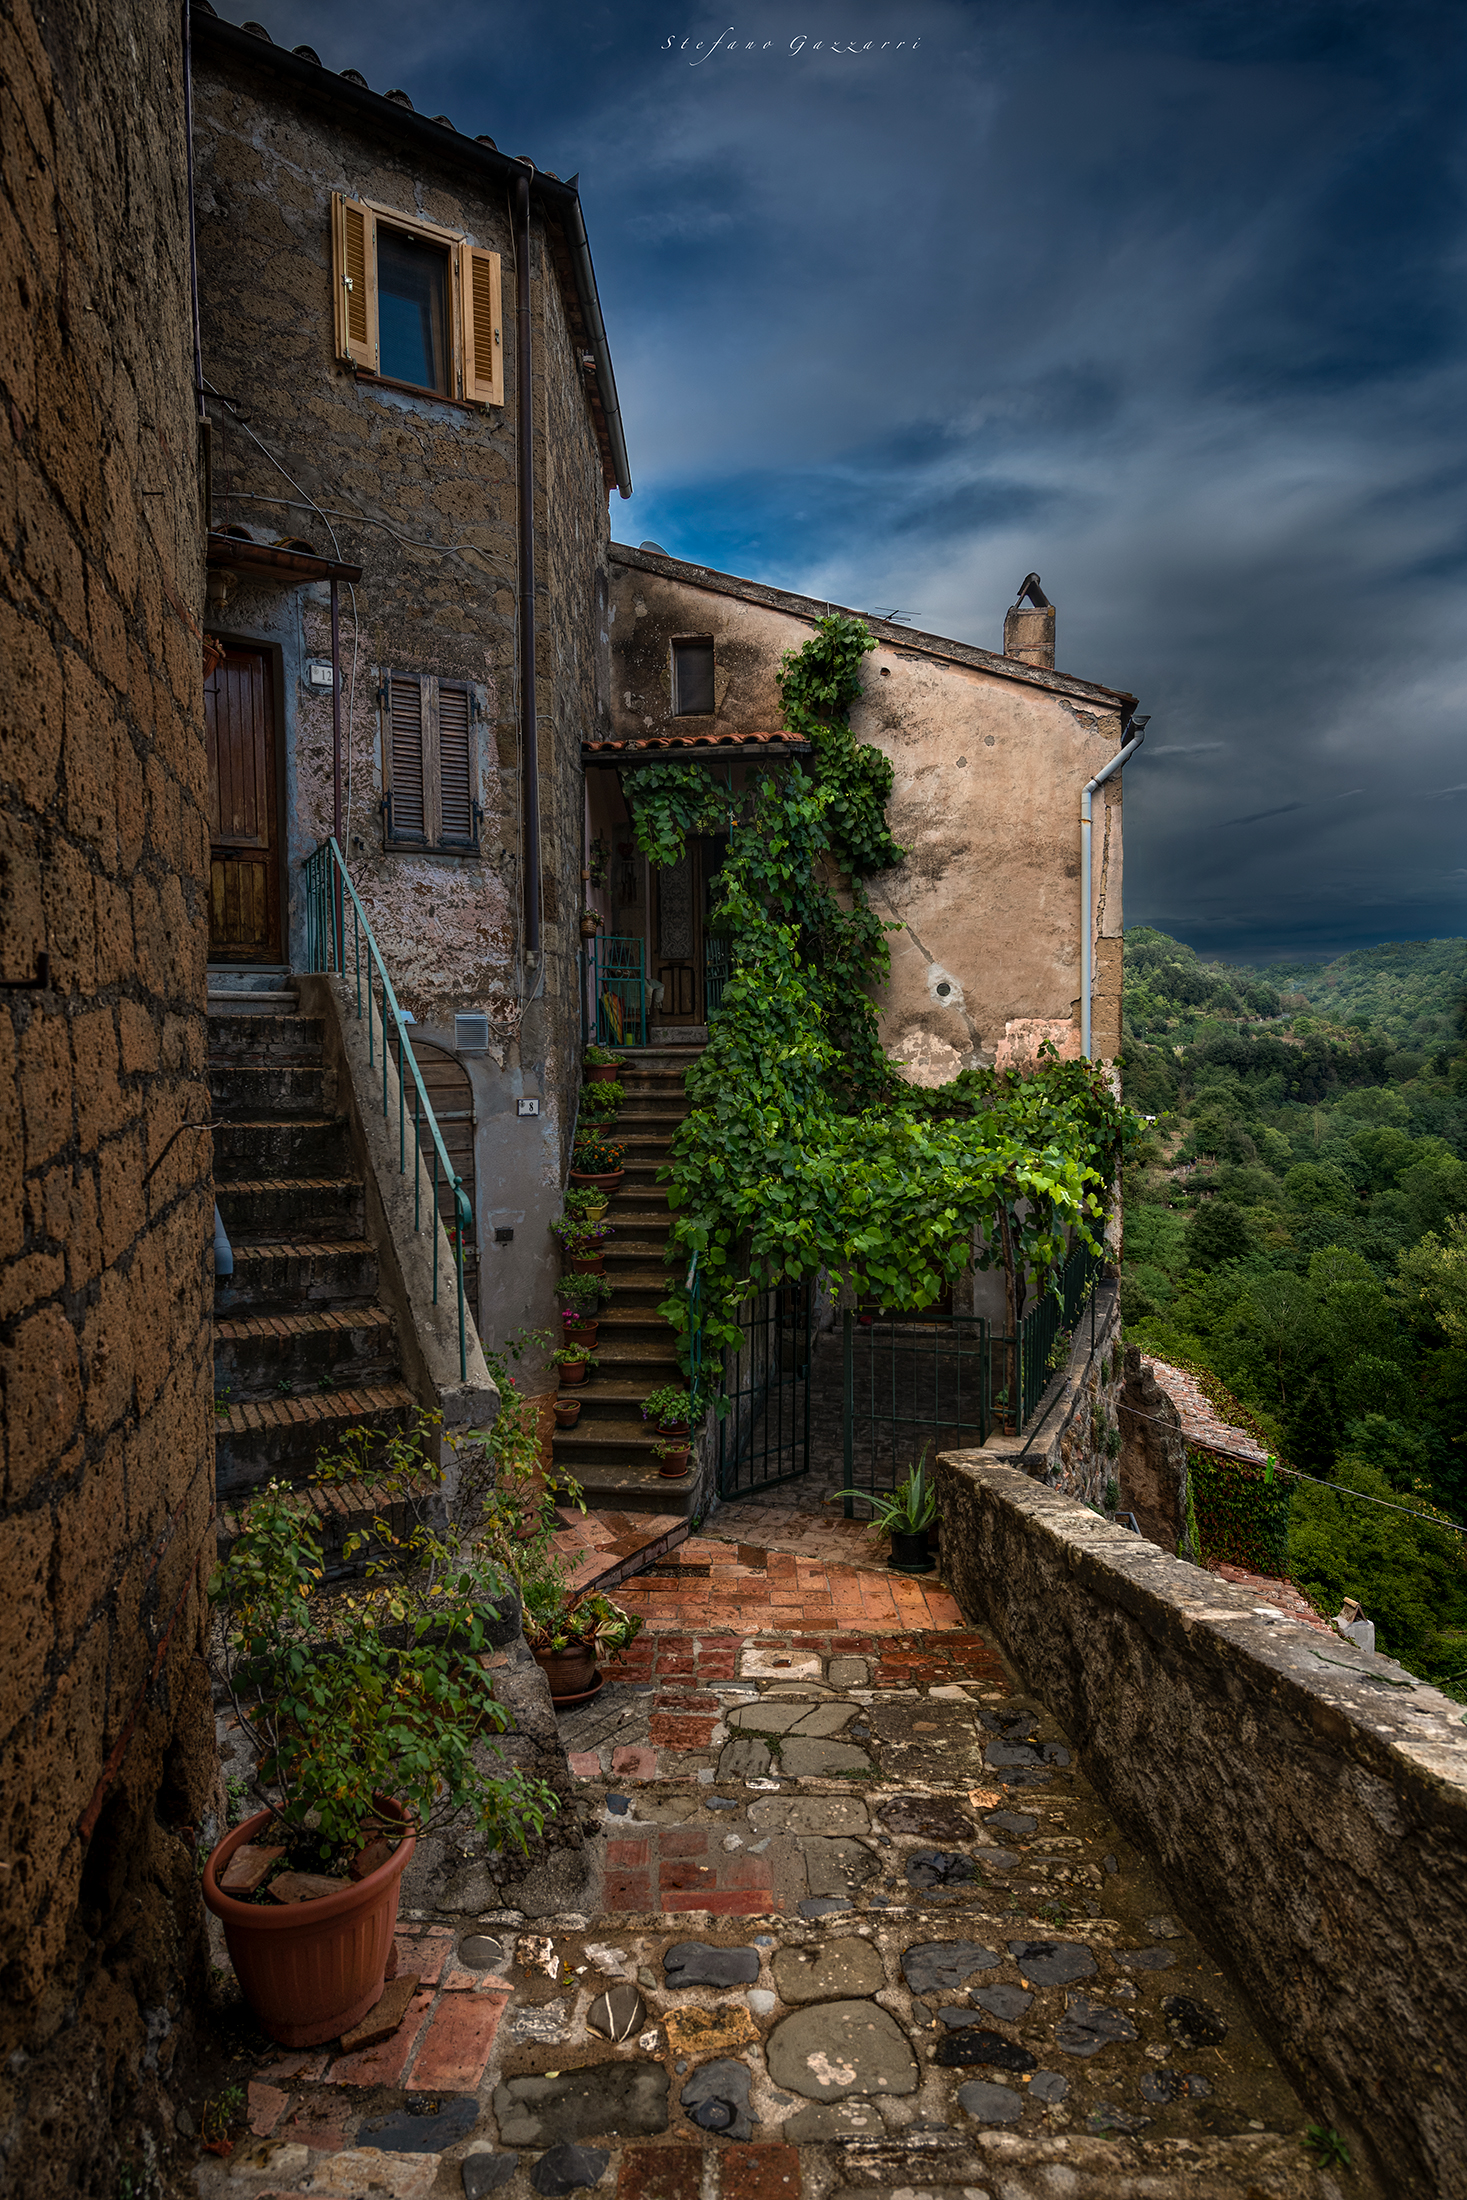 The alley of Sorano...